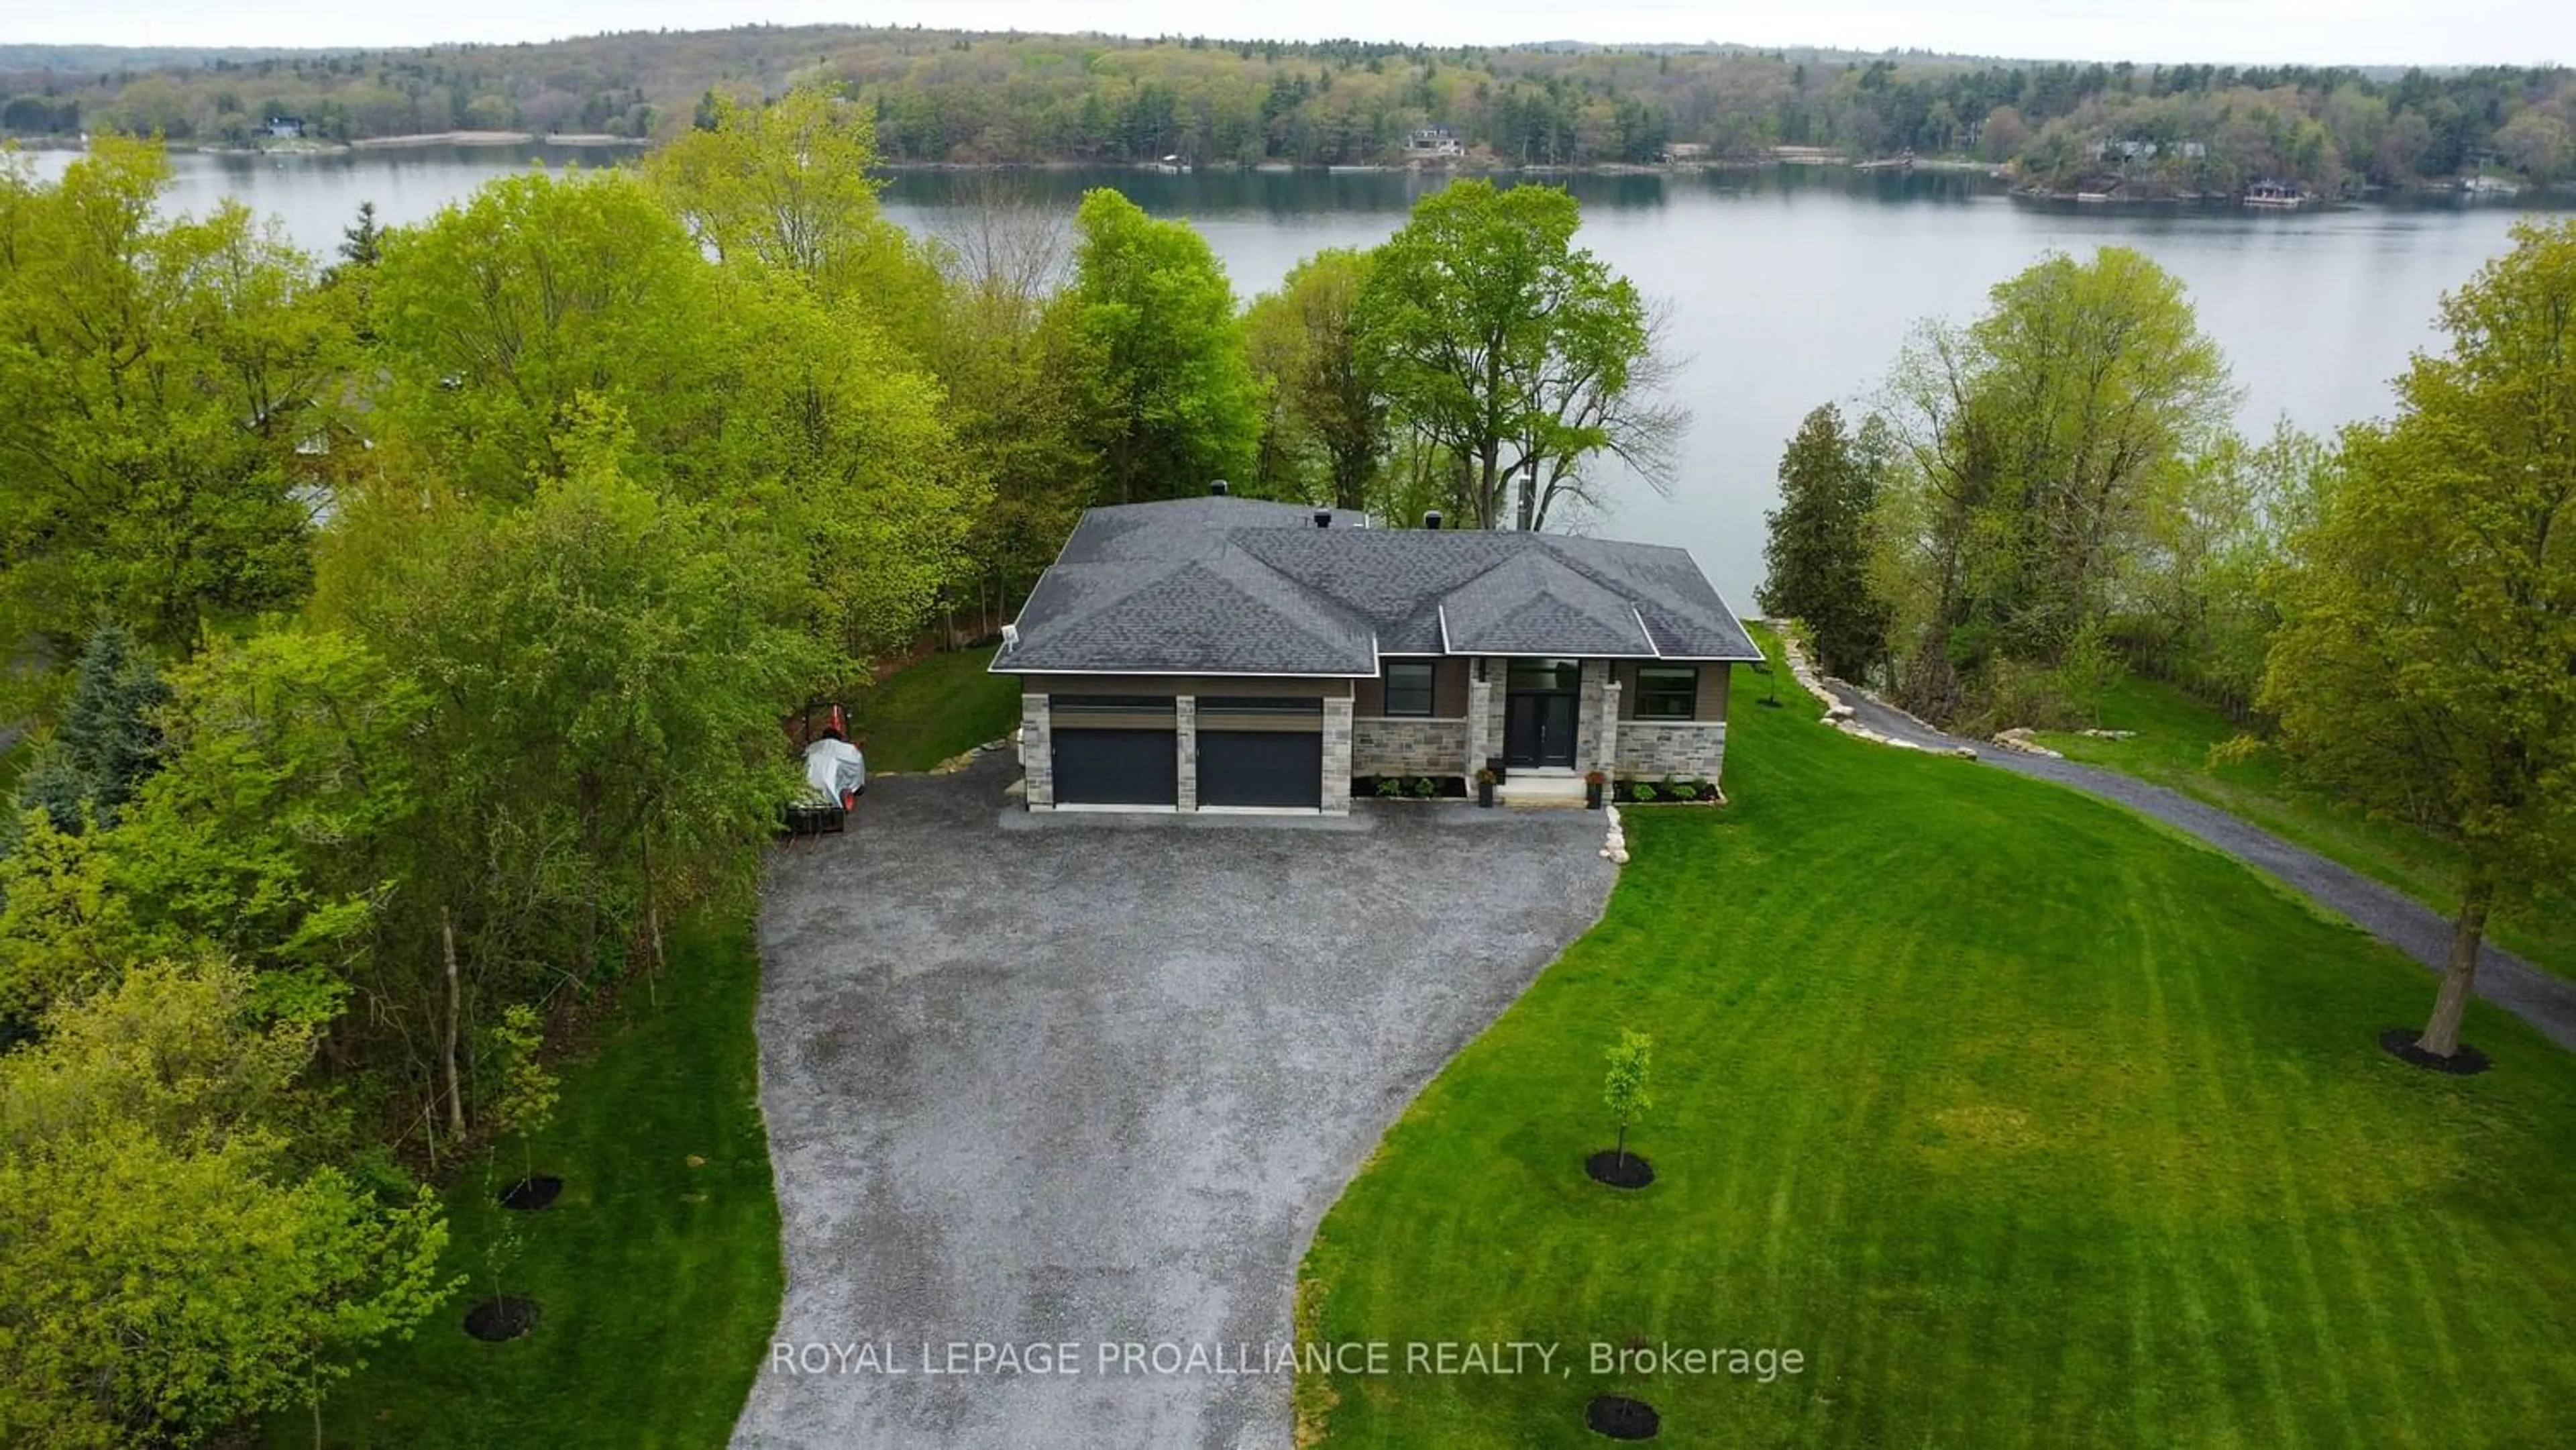 Lakeview for 747 North Shore Rd, Frontenac Islands Ontario K7G 2V6